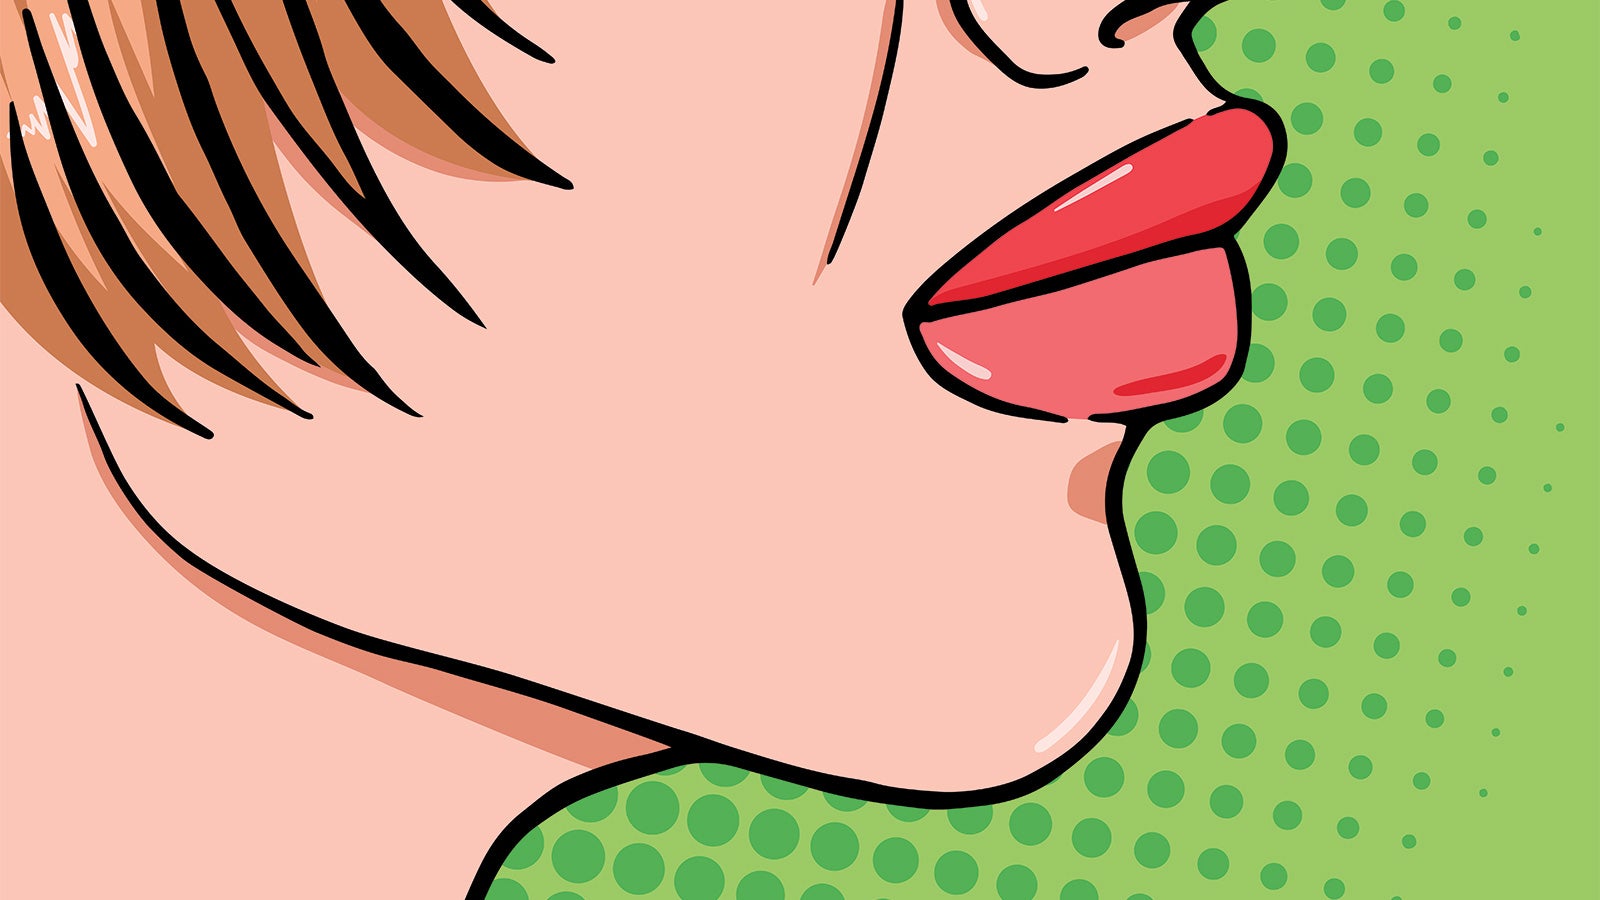 A pop art illustration of a woman's mouth and chin.